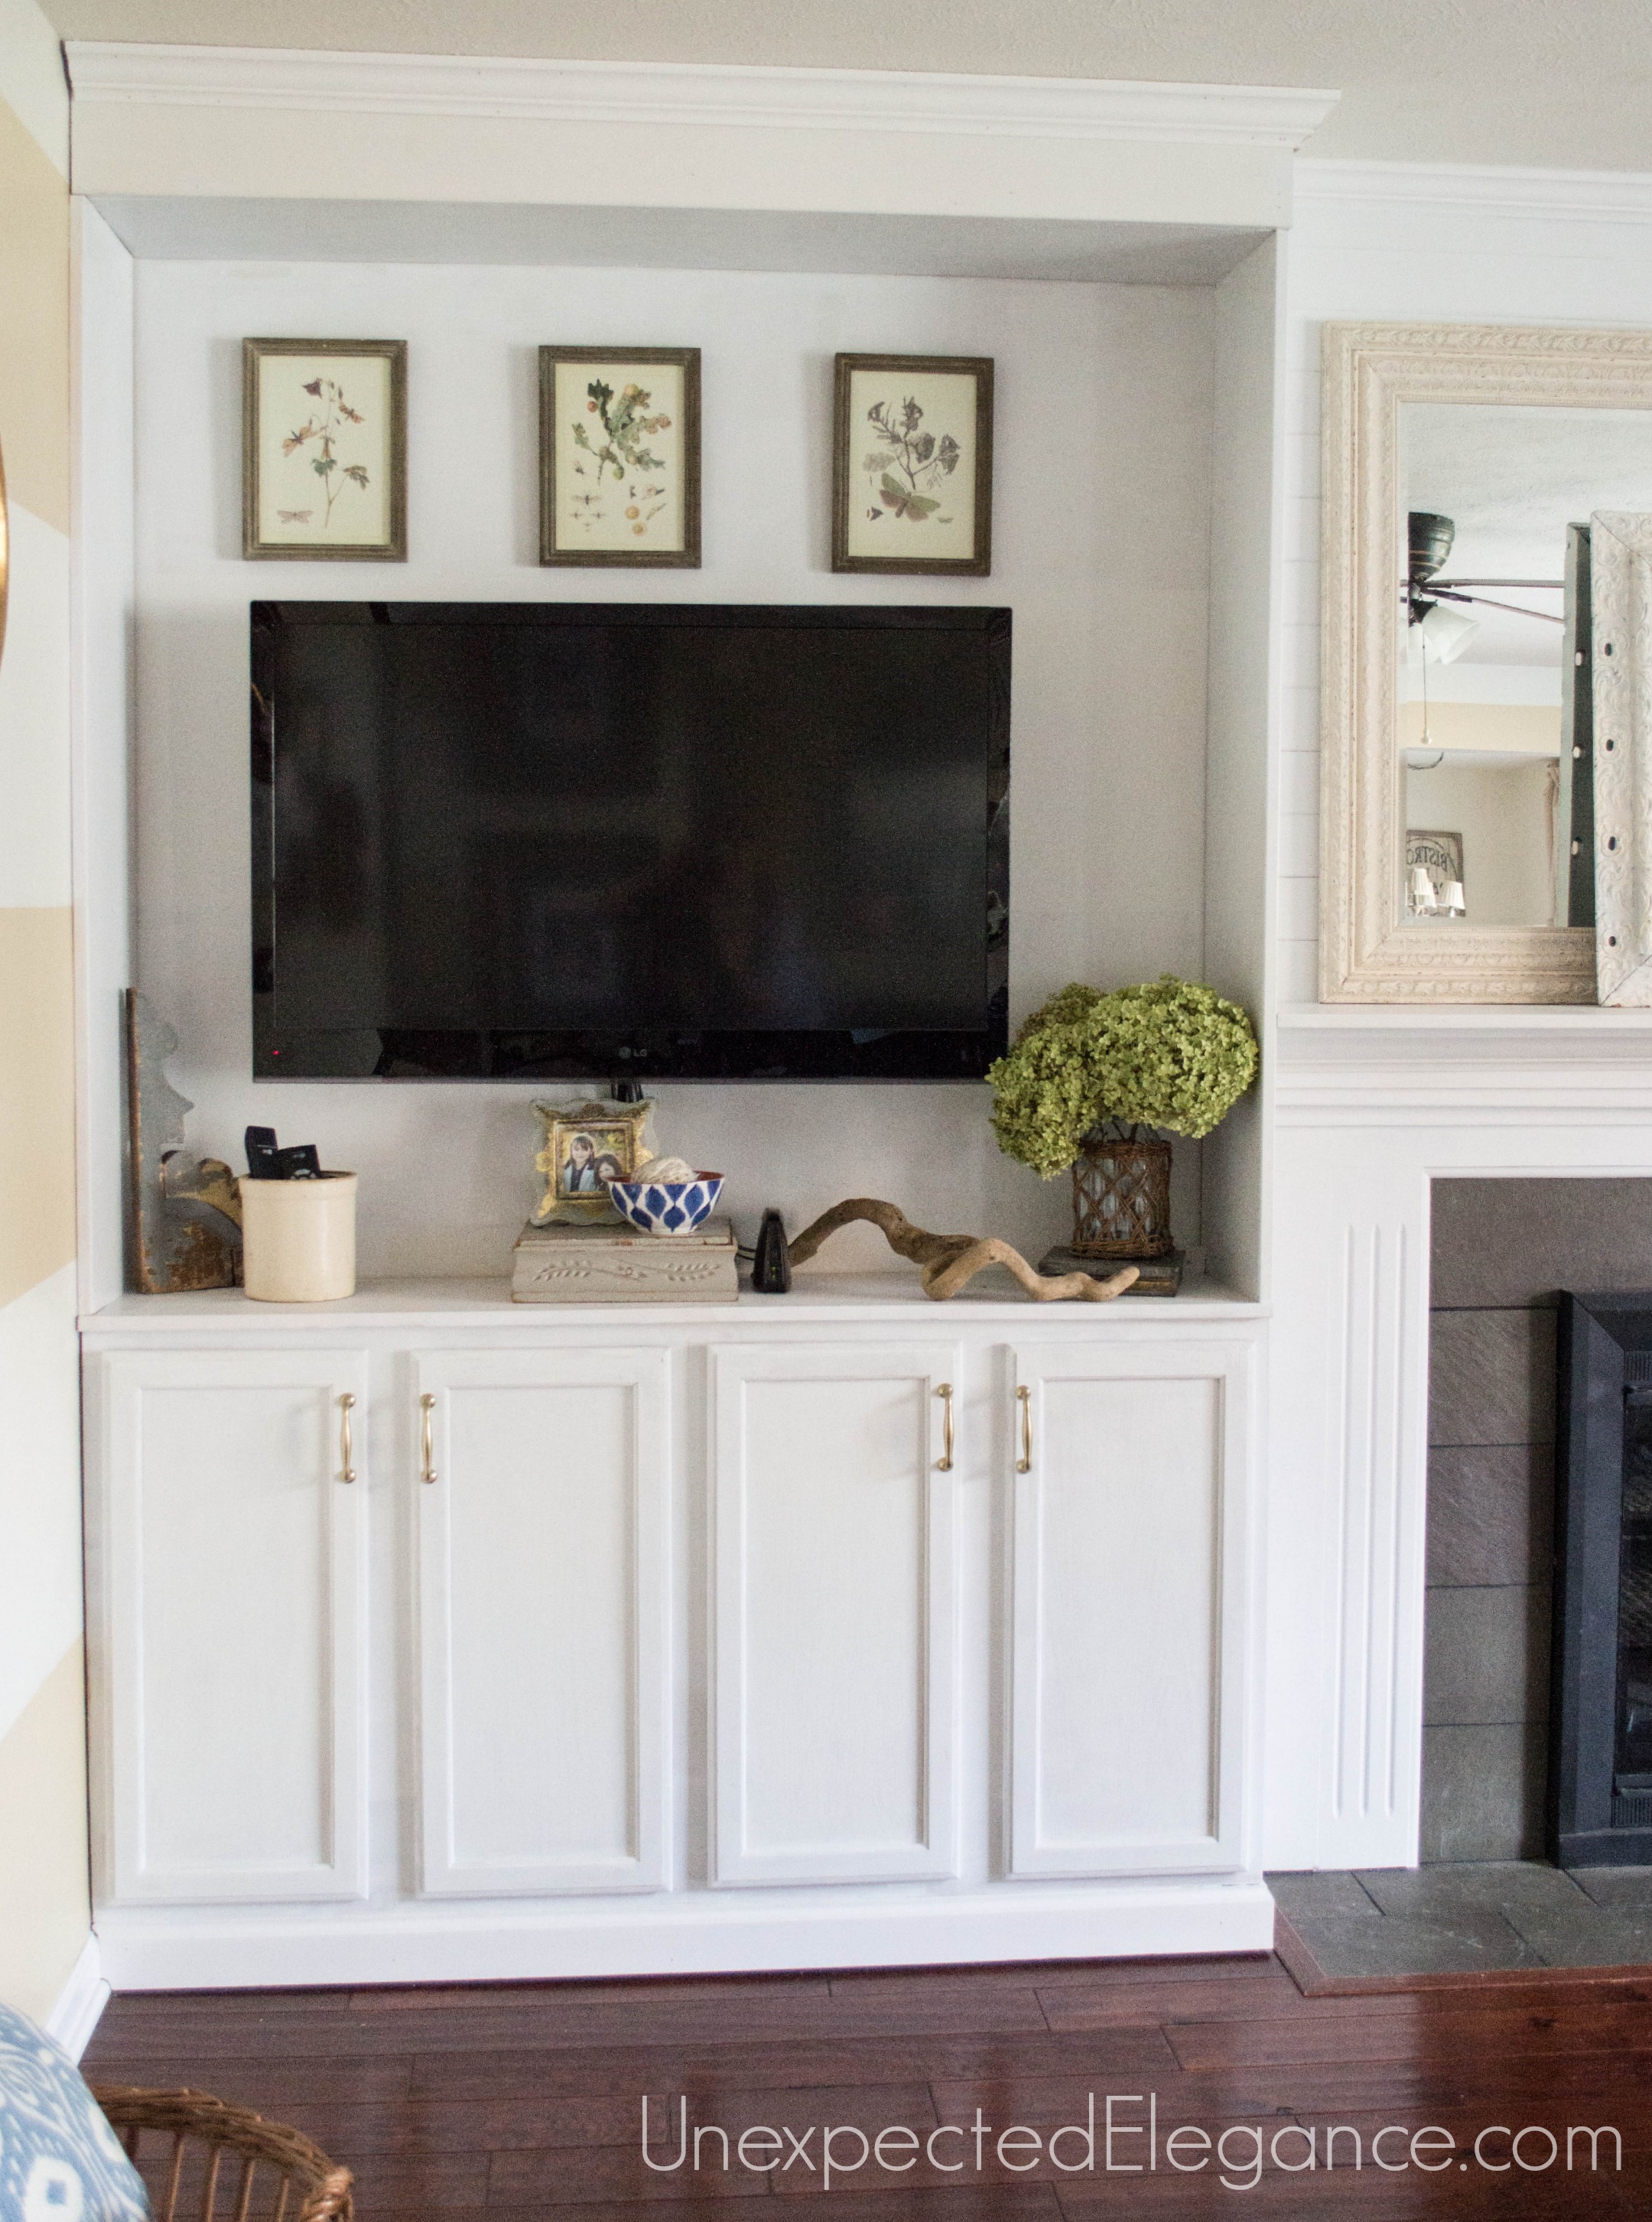 See how to transform you your living room with DIY fireplace built-ins! It completely changed the look of the space and made it feel bigger.